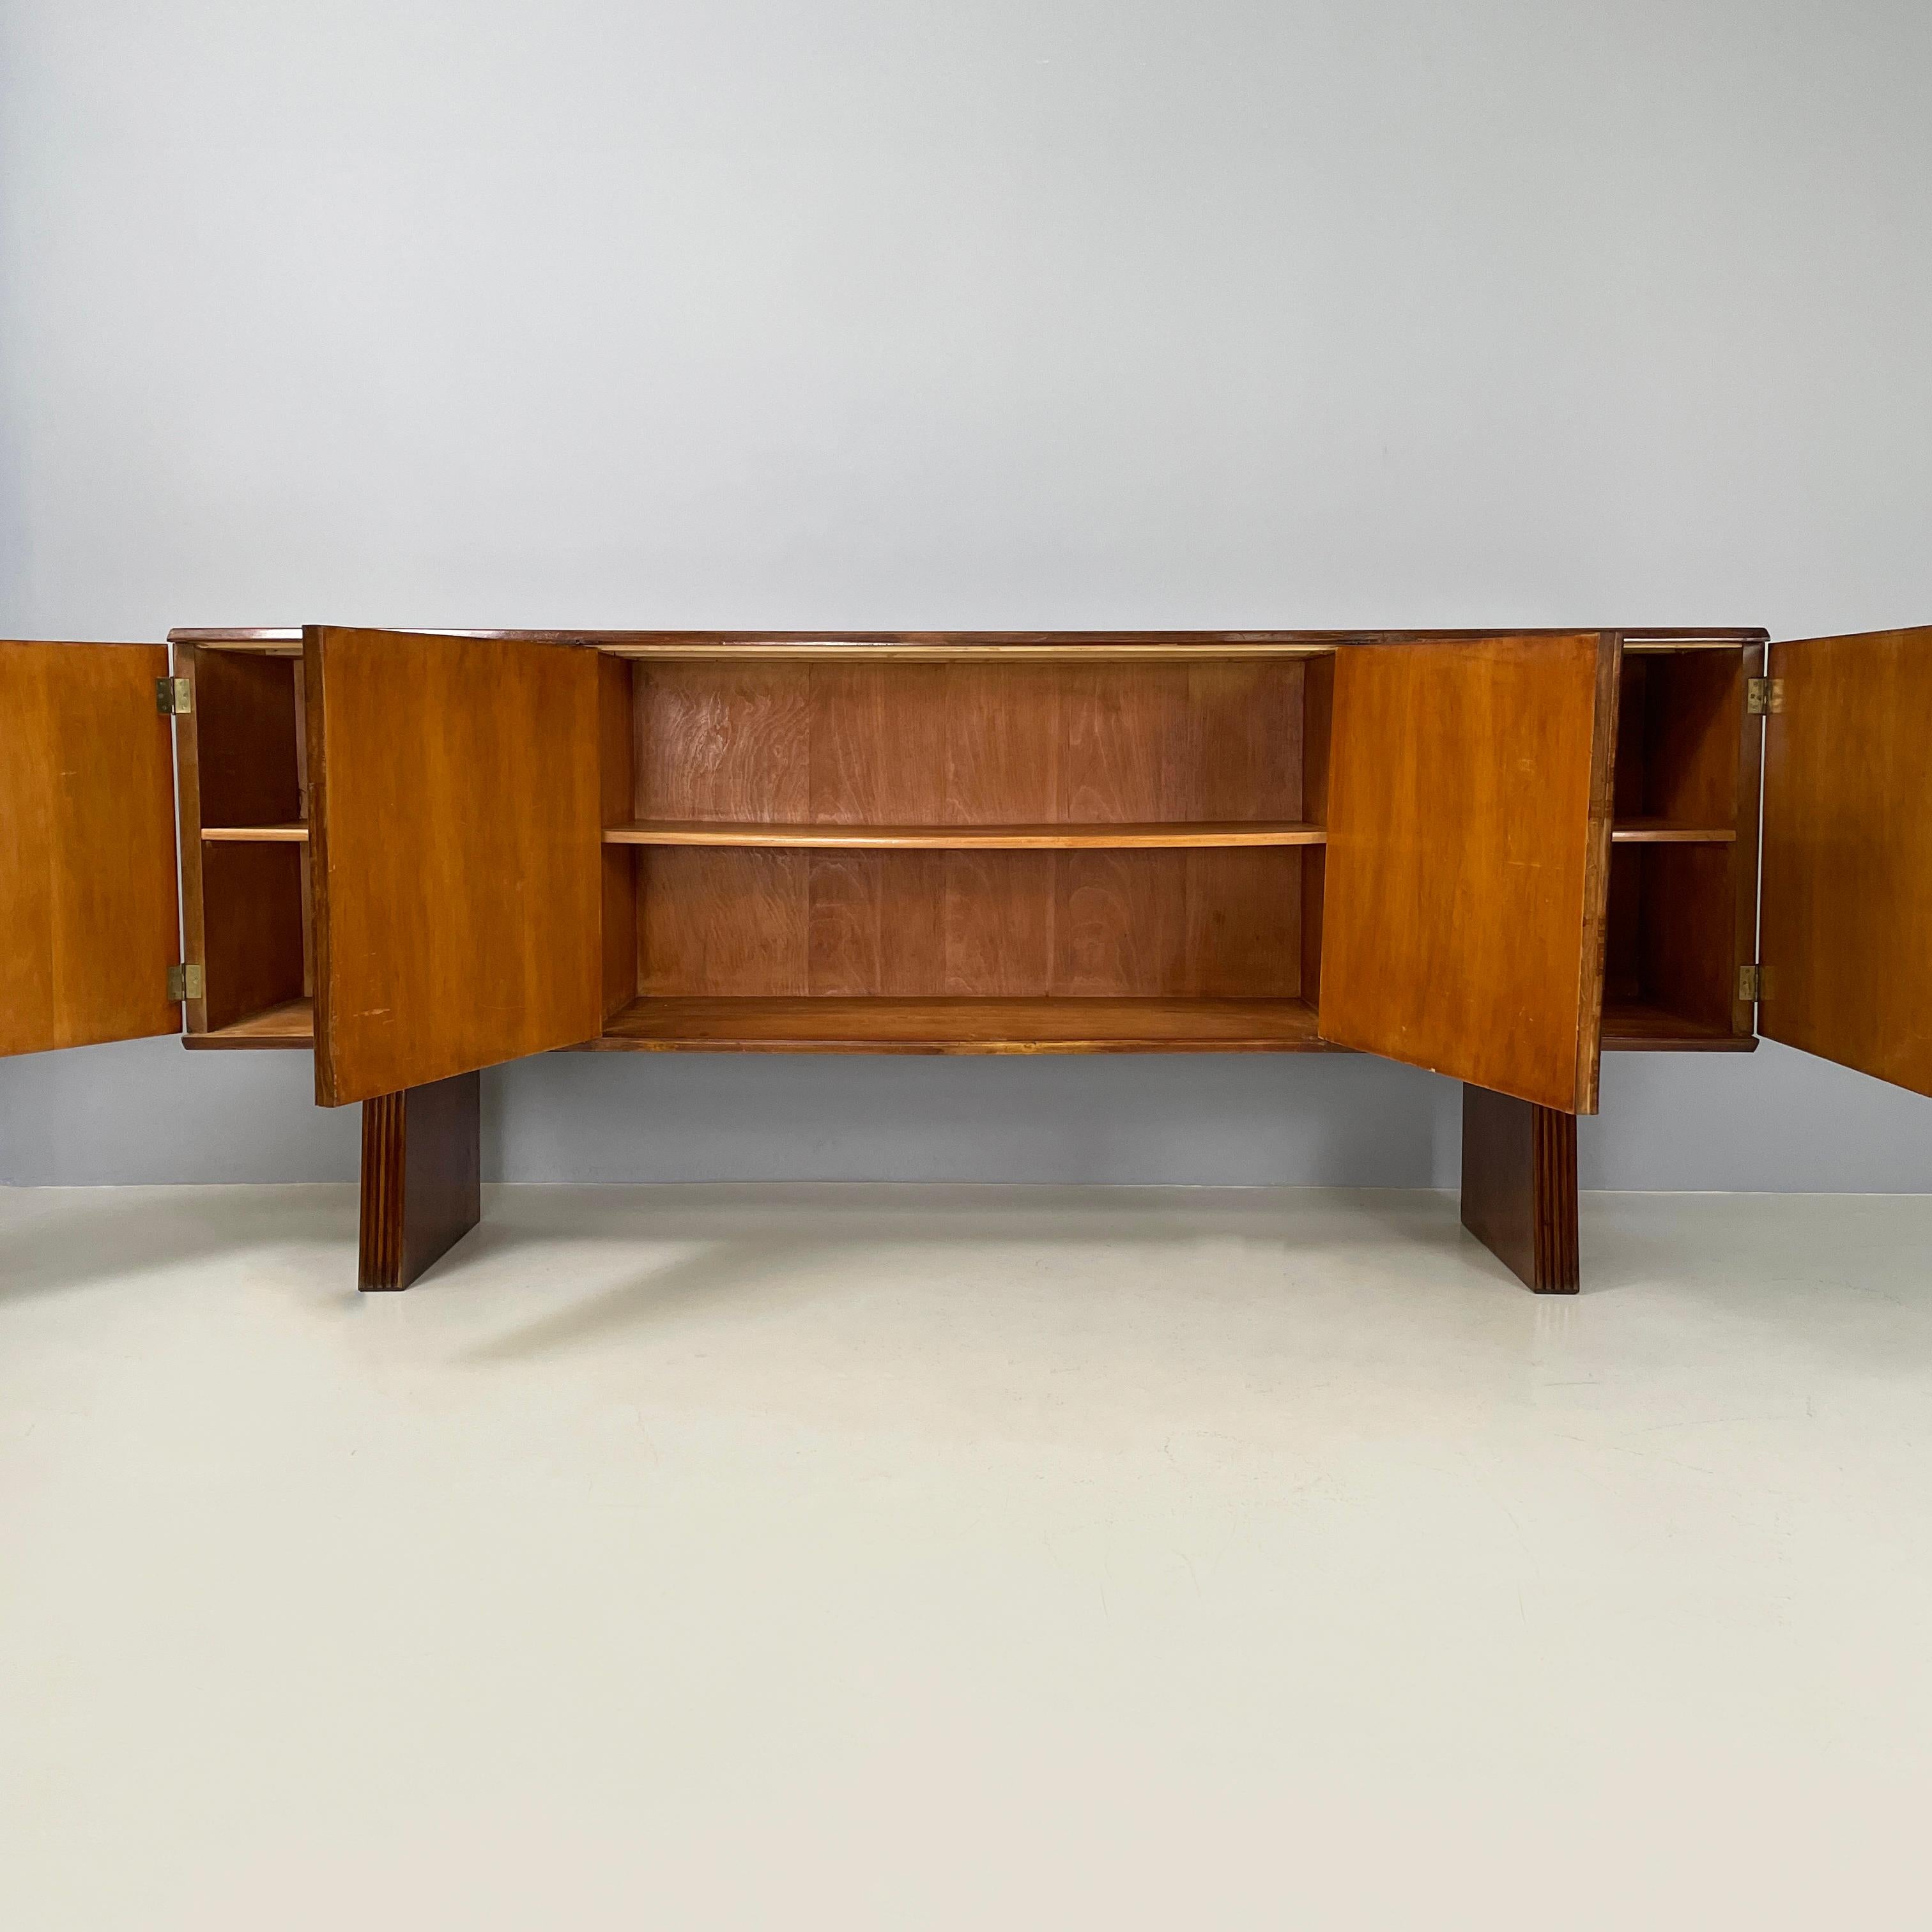 Italian Art Deco wooden sideboard with four doors by Gio Ponti, 1940s  For Sale 1